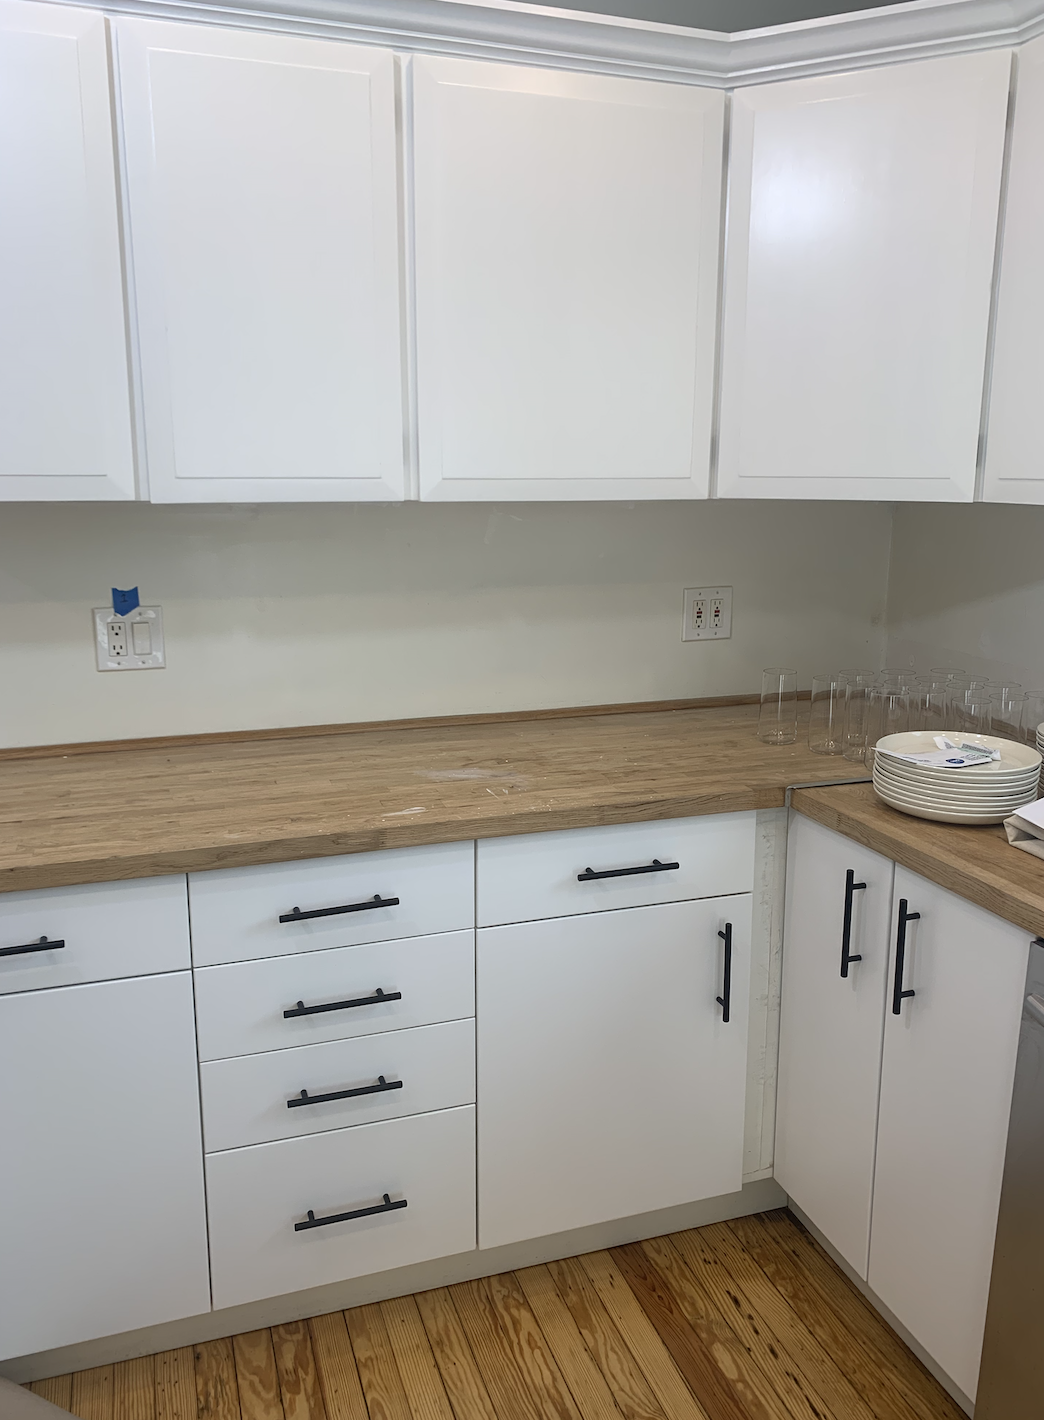 How To Paint Wooden Kitchen Cabinets - Step by Step Guide - Final Product - Kitchen Photos #diy #cabinets #Kitchen #painting #kitchencabinets #paintingkitchen #benjaminmoore #beforephotos #home #diyhome #homeproject #westchestercounty #newyork Simone Piliero - Simply by Simone